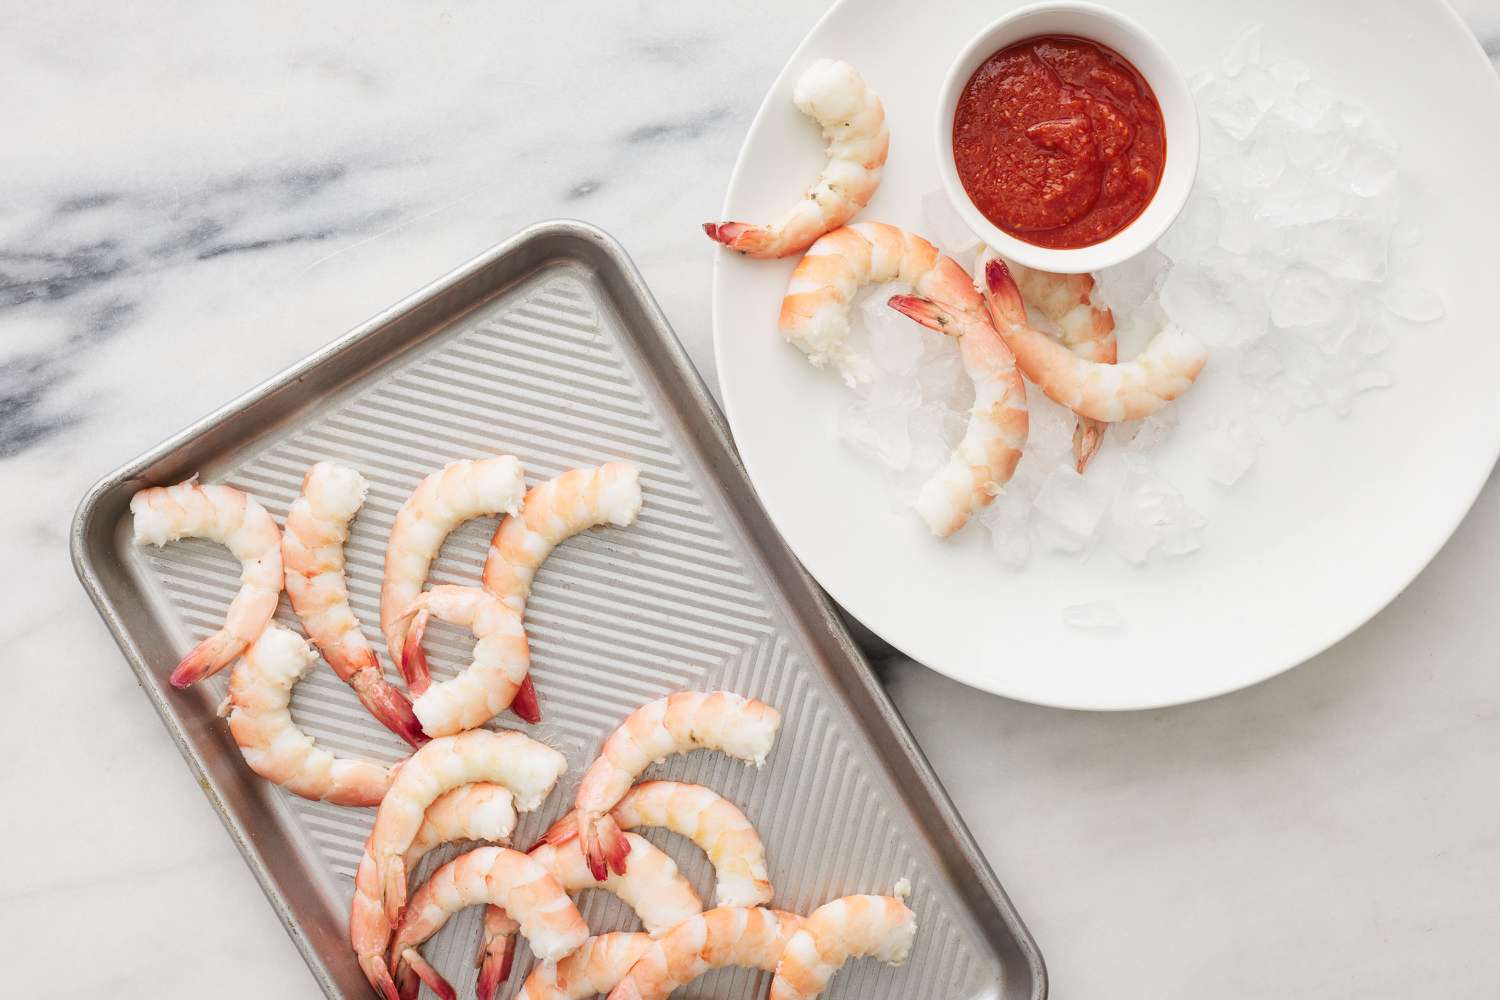 A large serving plate with ice, jumbo shrimp, and a small bowl of cocktail sauce next to a sheet pan of peeled jumbo shrimp